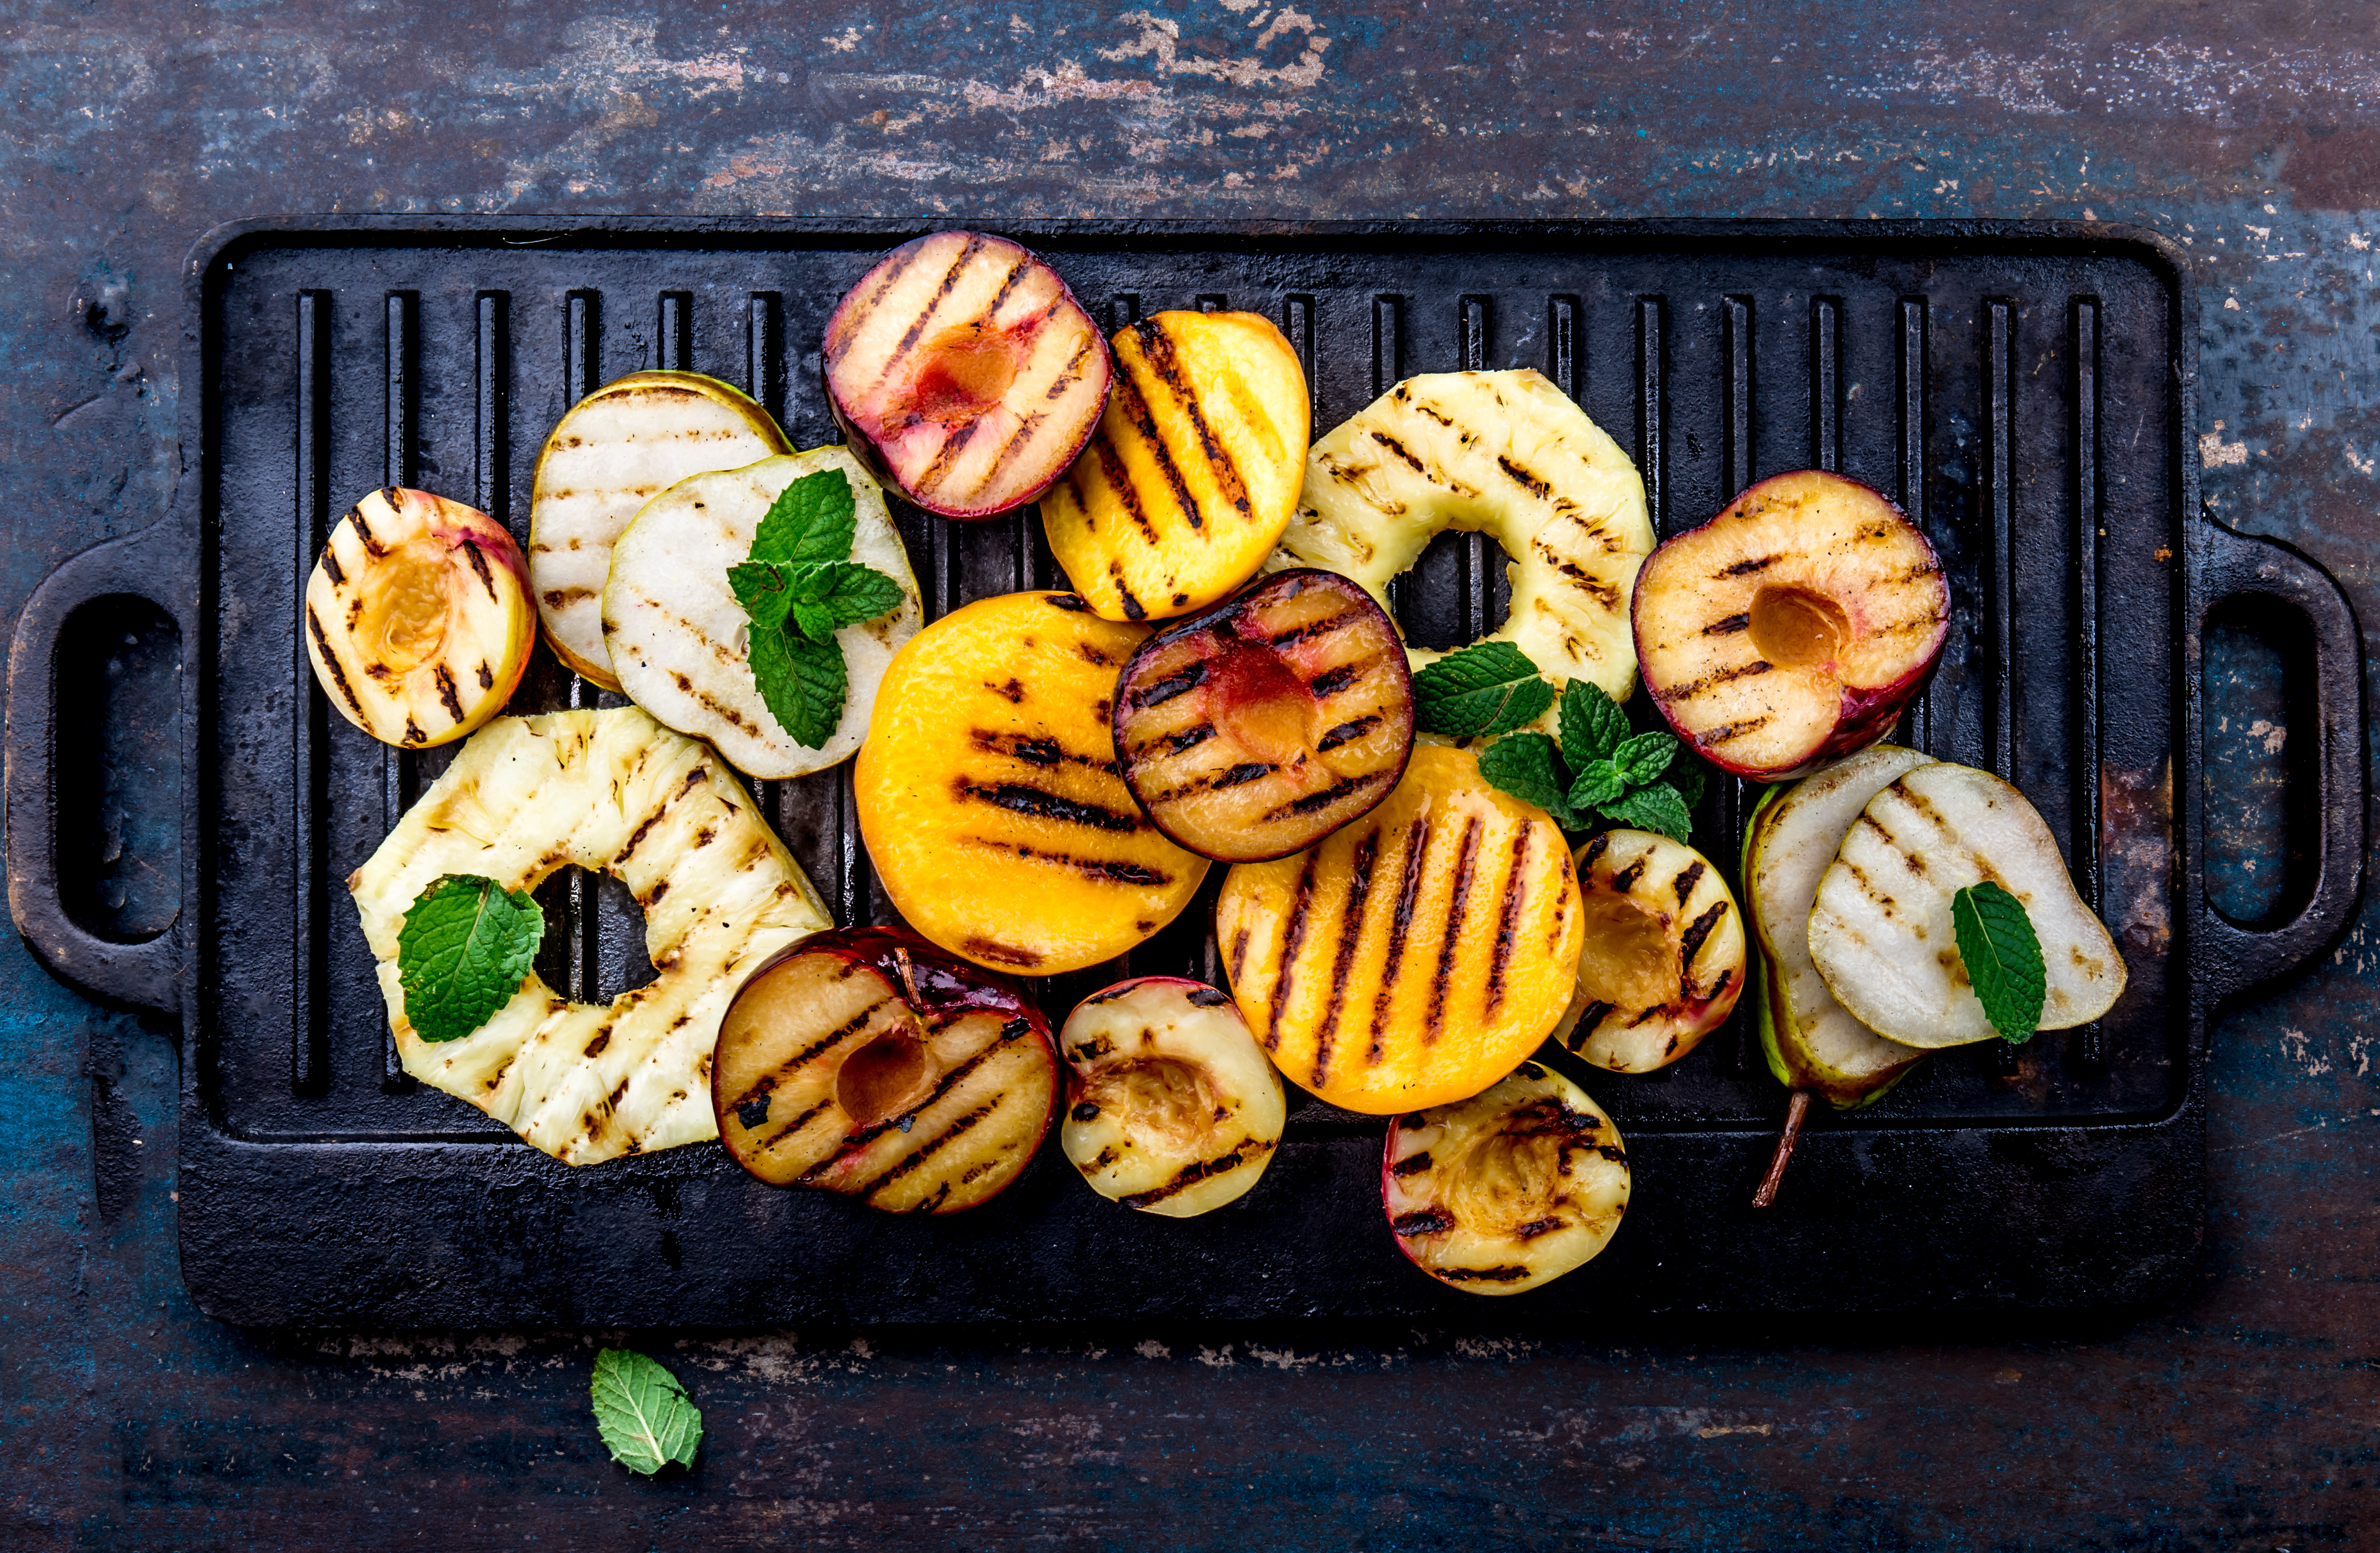 summer grilling - grilled veggies - grillied vegetables - grilled fruit - grilled peaches - grilled avocados - grilled corn - grilled melon - BBQ - outdoors - outdoor cooking - camping - cookout - summer - summertime - stone fruit